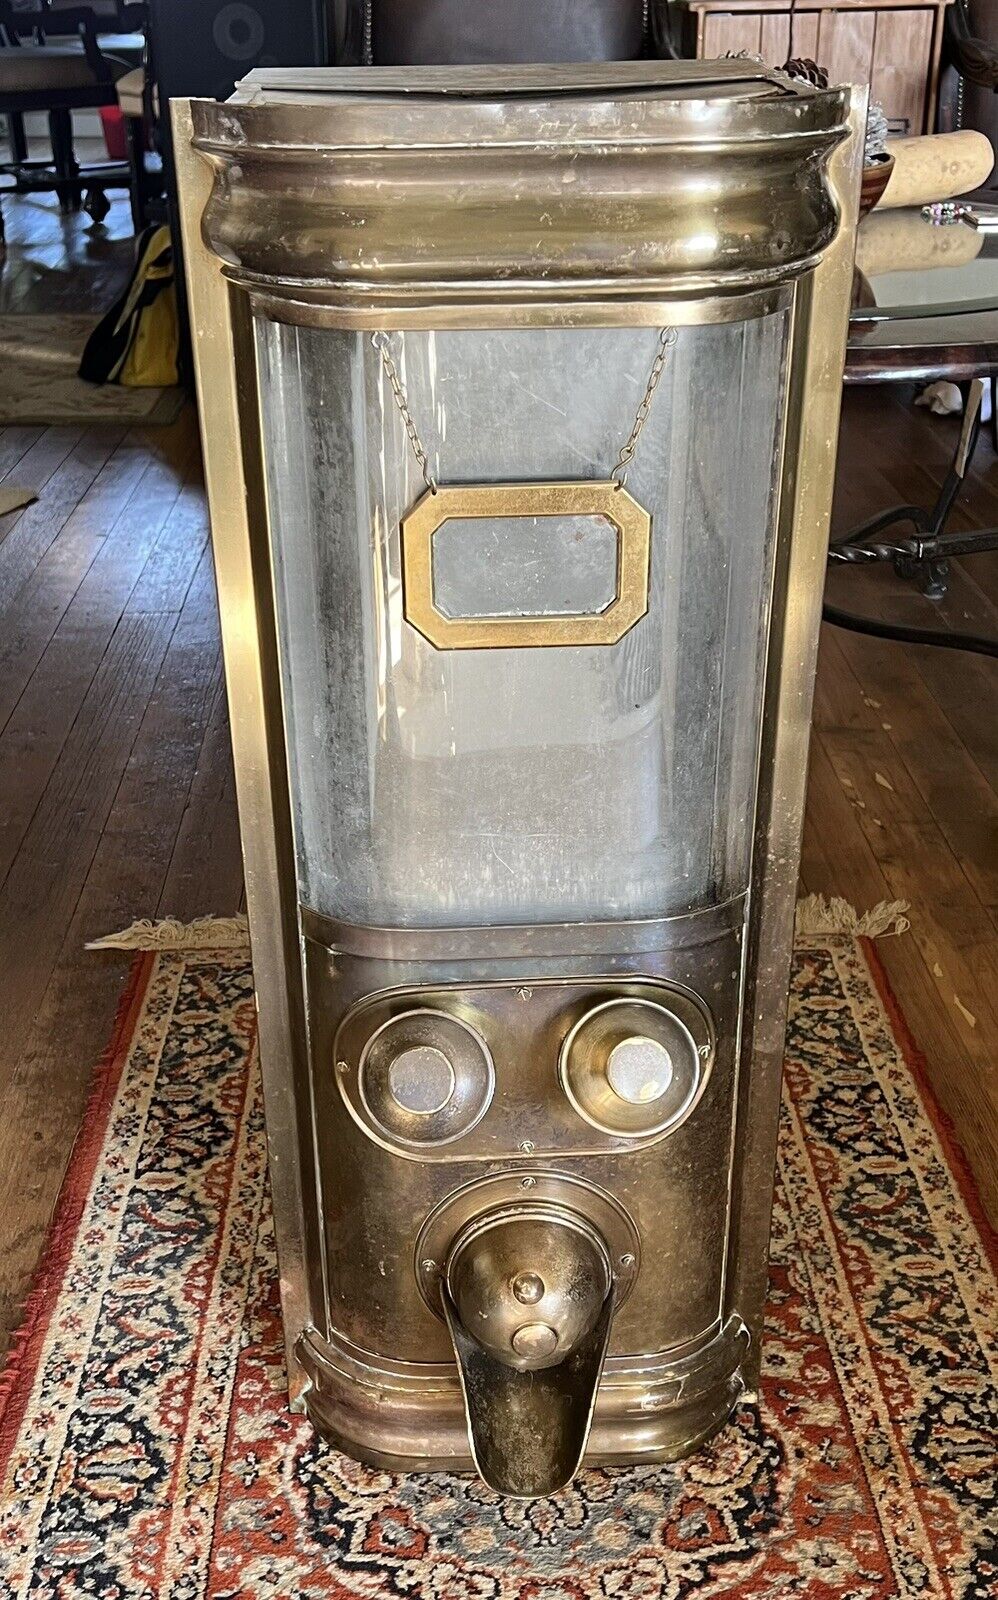 Unique Vintage French Commercial Coffee Bean Dispenser In Brass, Copper And Tin